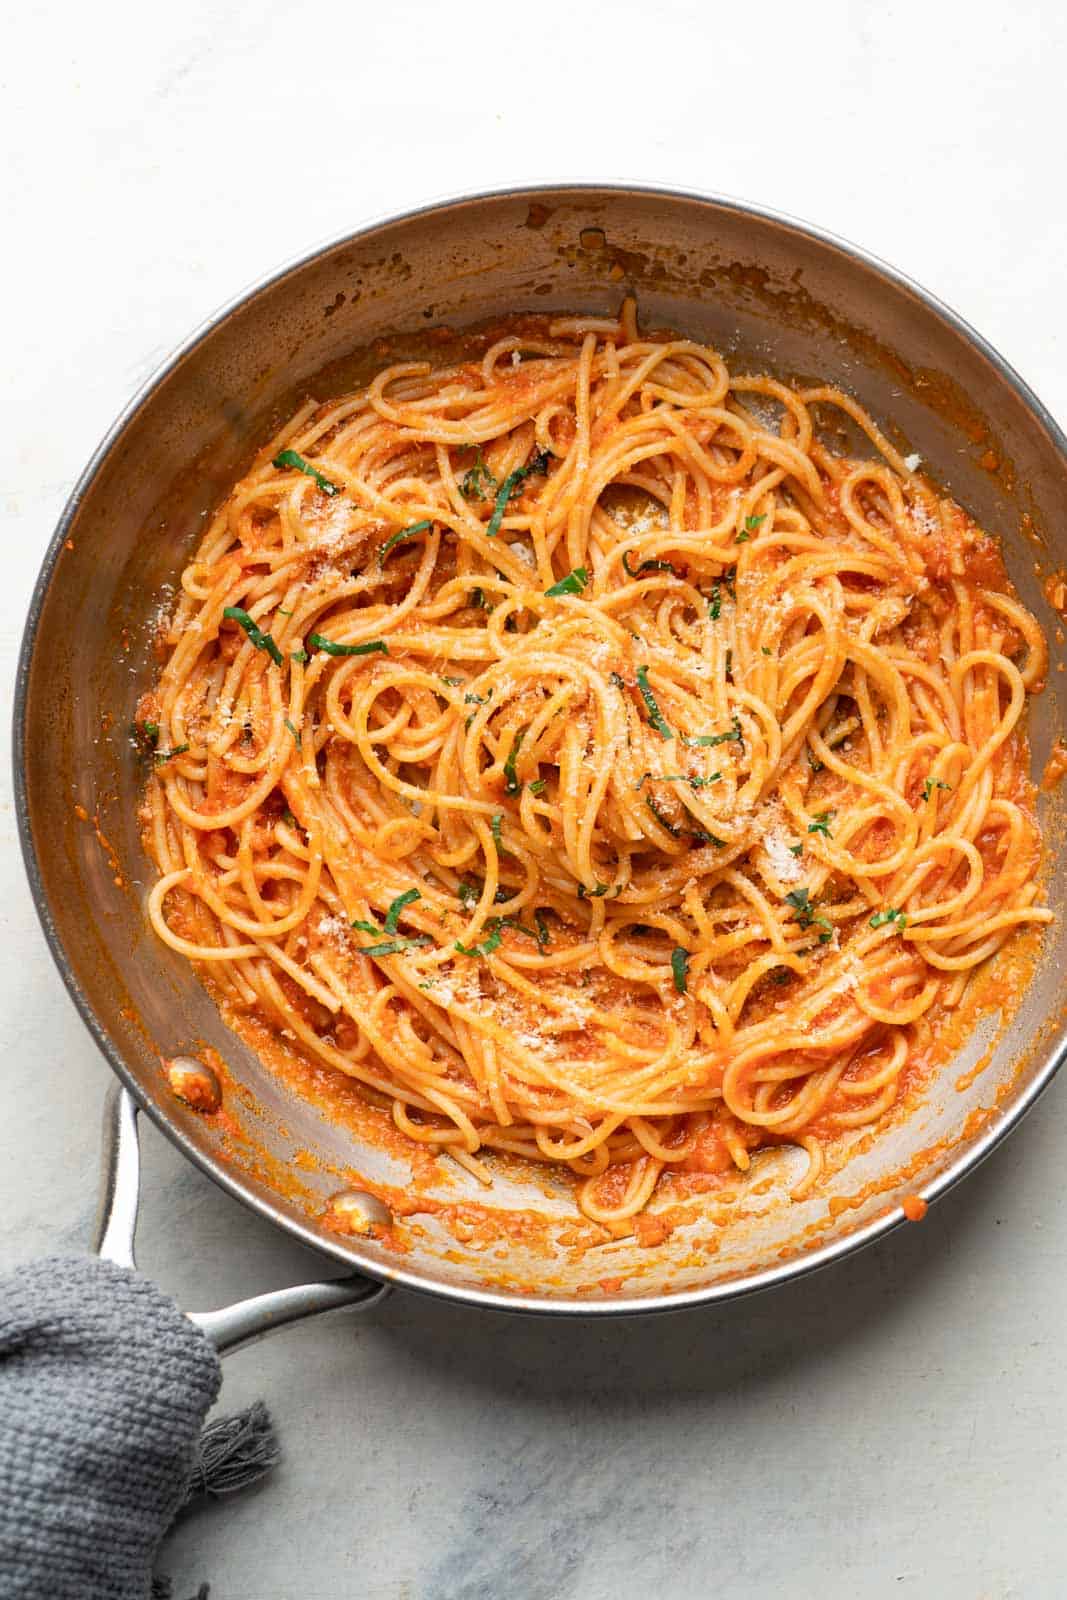 Spaghetti tossed in pasta sauce in a skillet